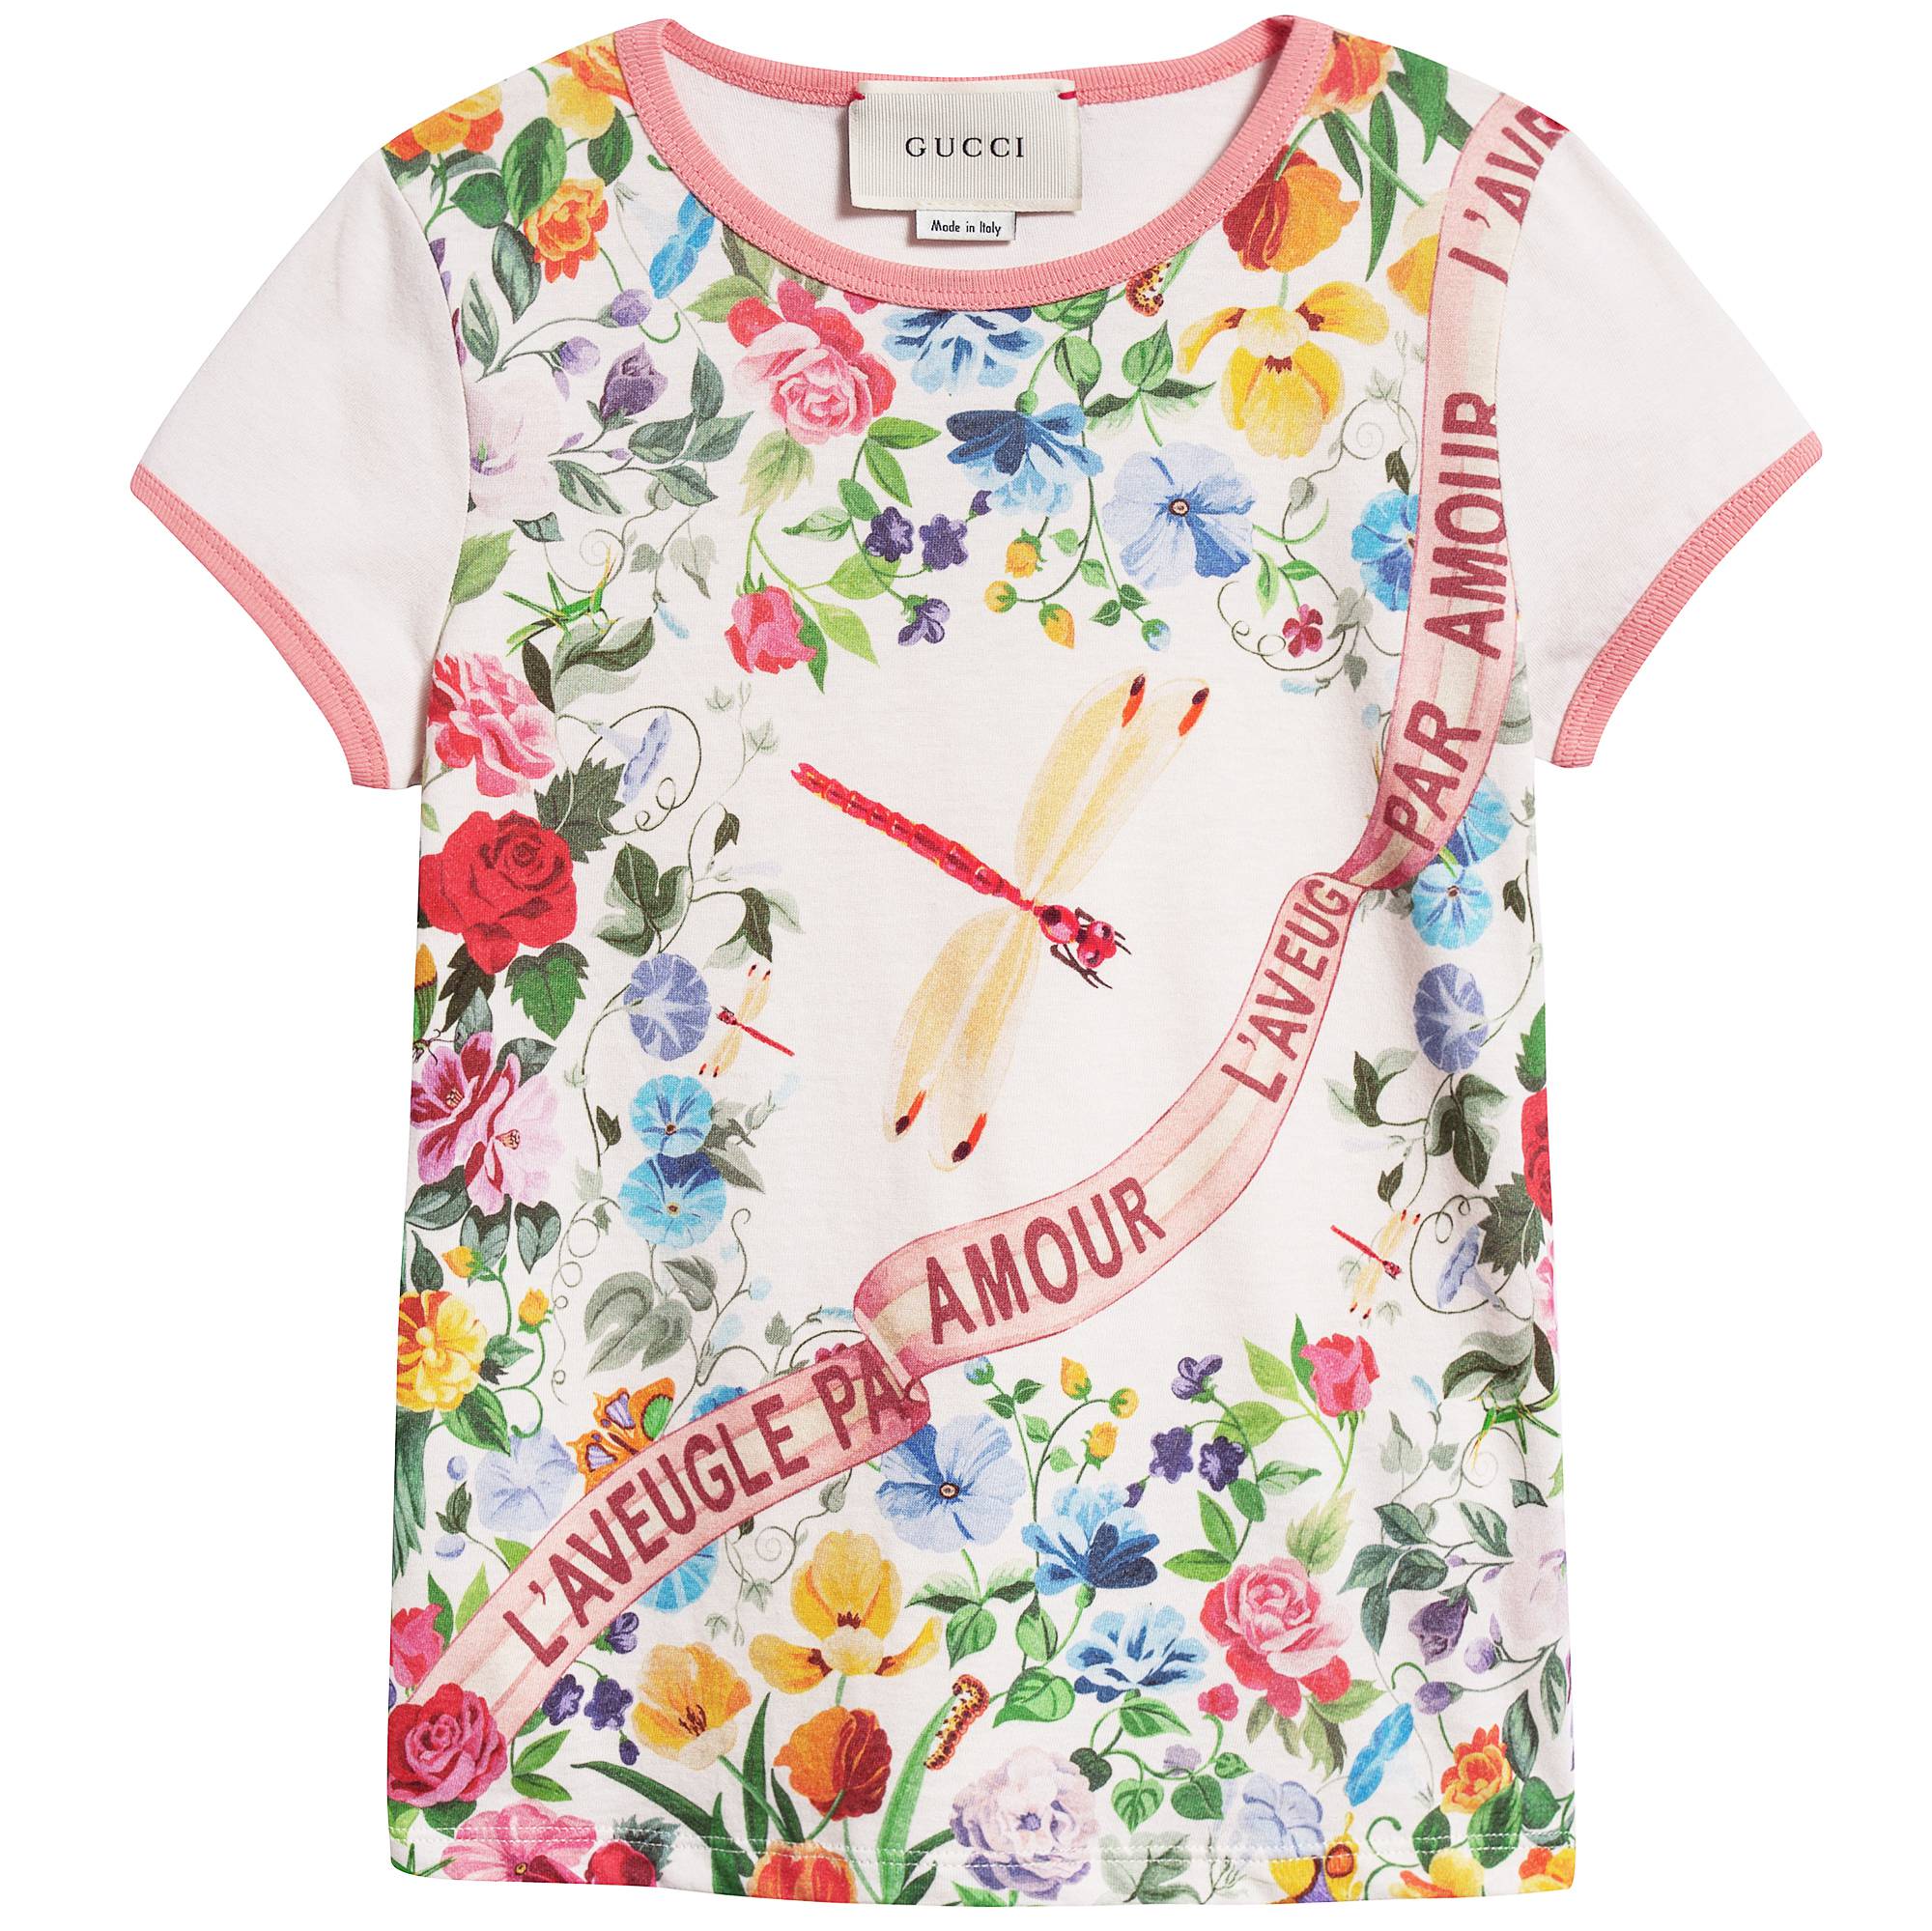 Girls White Color Printed T-shirt